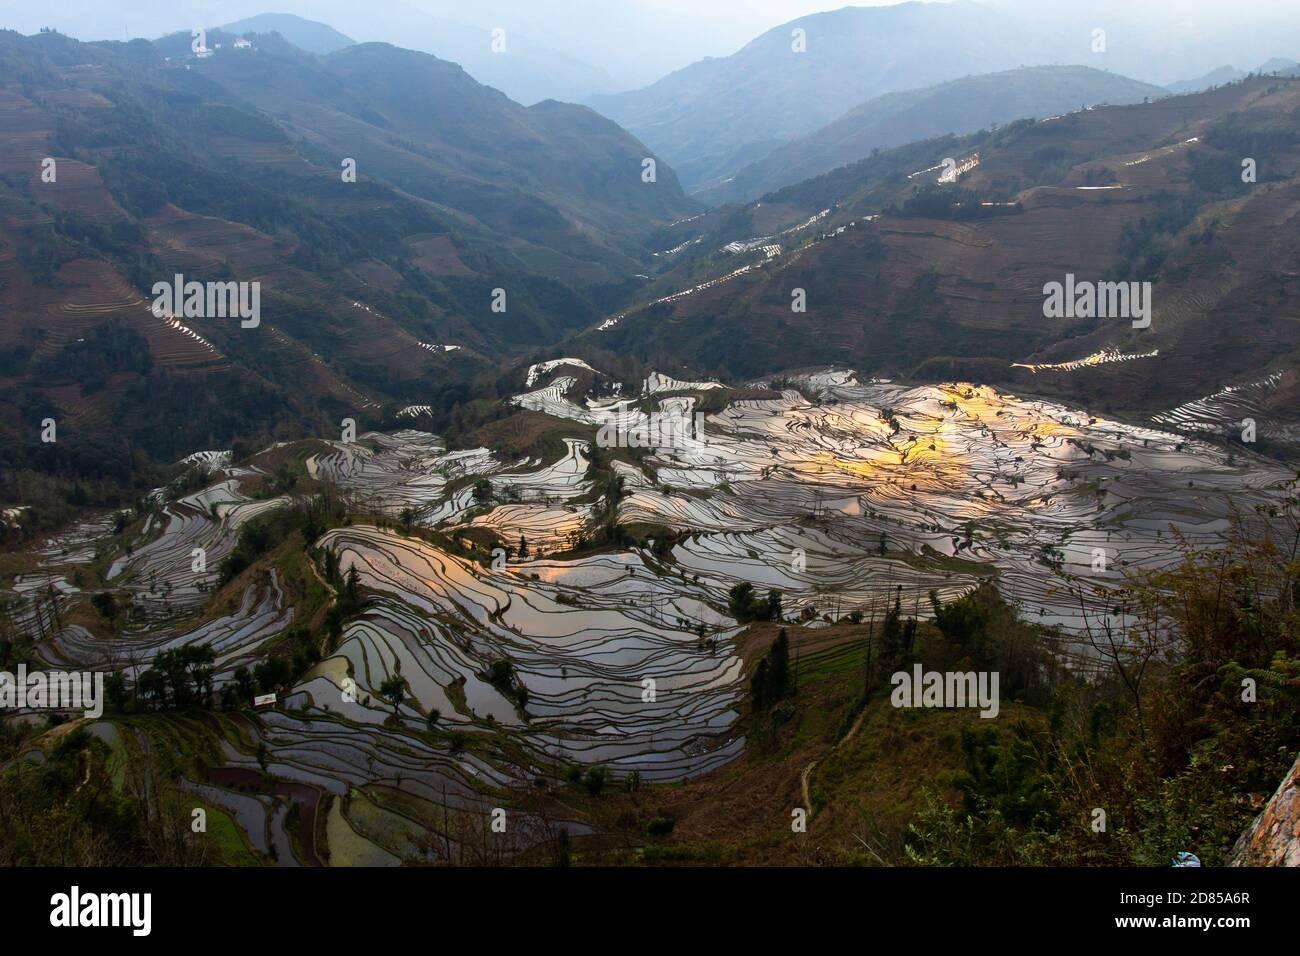 Yuan Yang Rice Terrace in China, Largest Rice Terrace in the World, World Heritage Site is in Yunnan Province Stock Photo